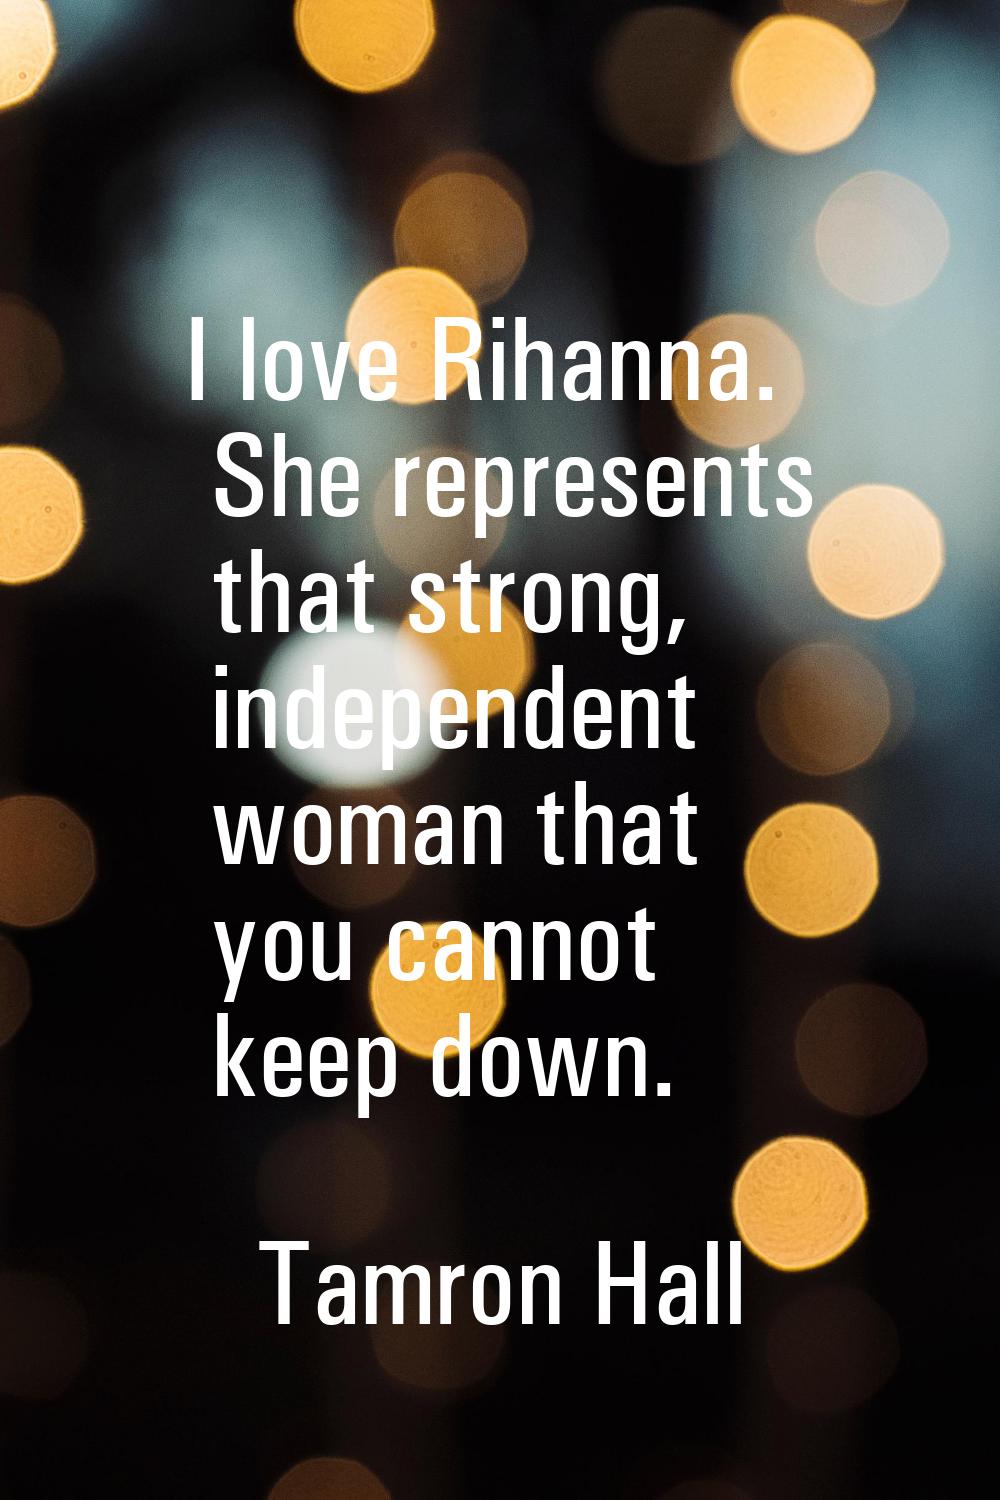 I love Rihanna. She represents that strong, independent woman that you cannot keep down.